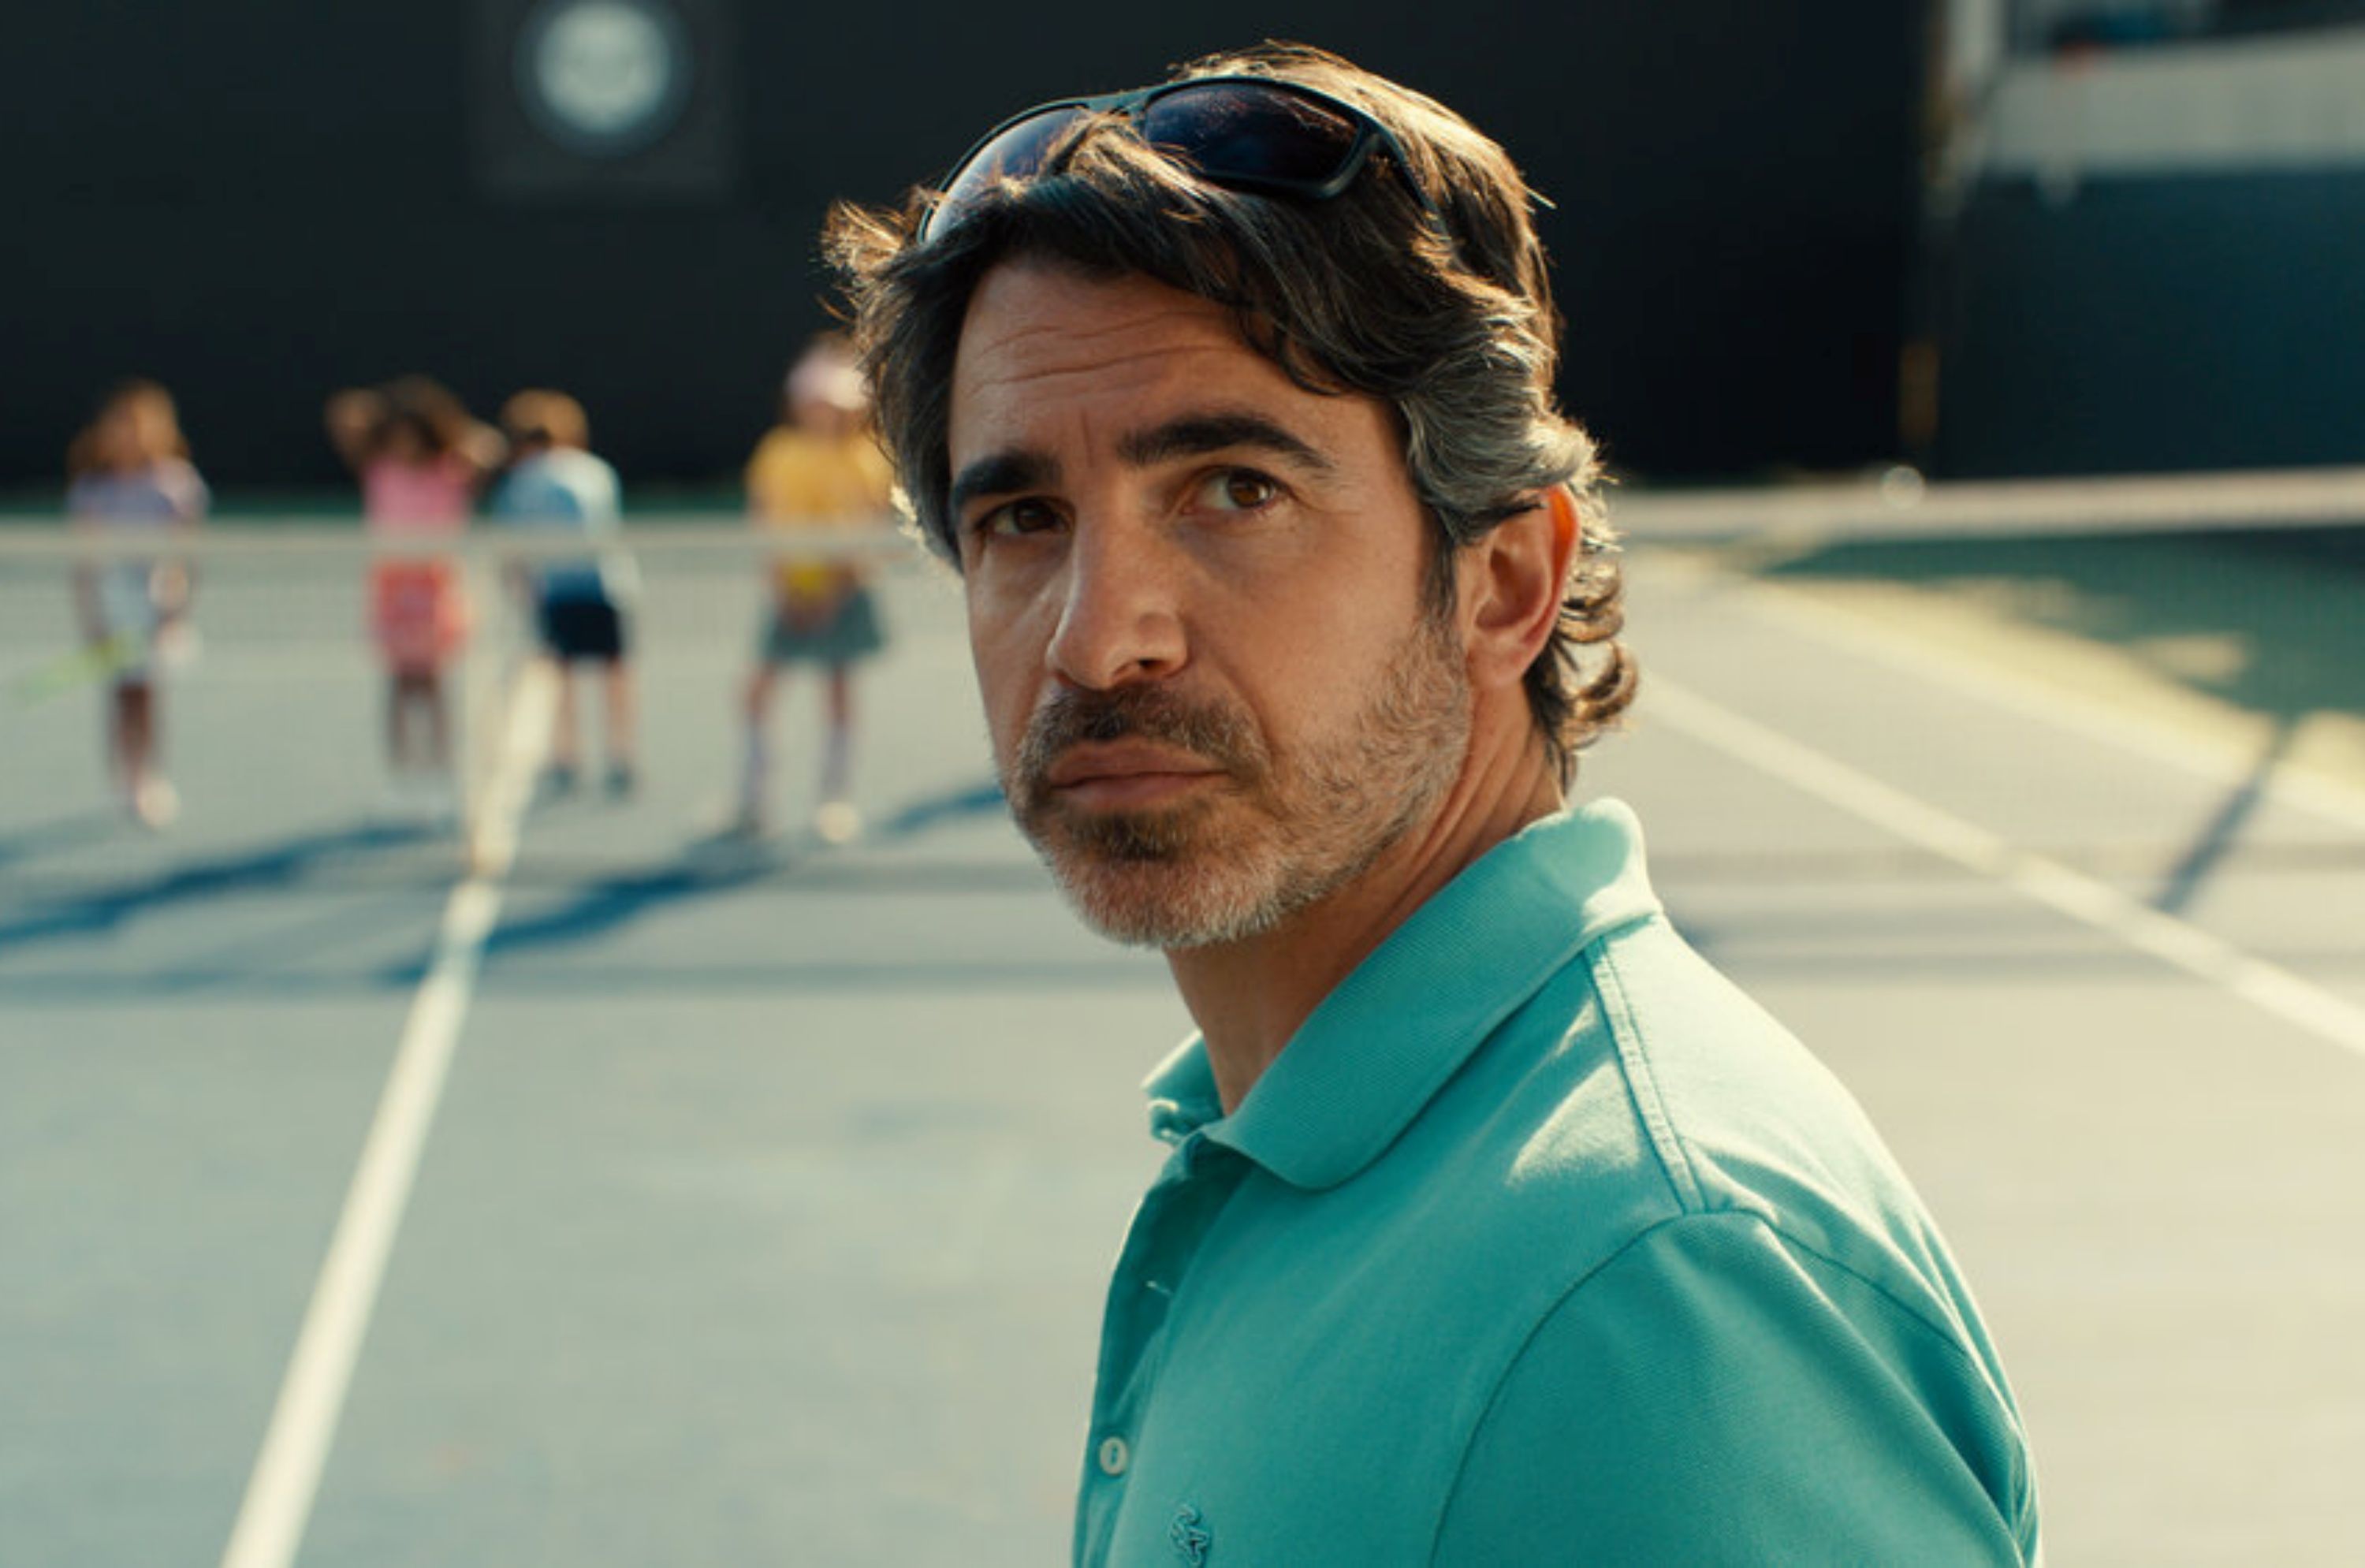 Chris Messina as Nathan Bartlett in Based on a True Story